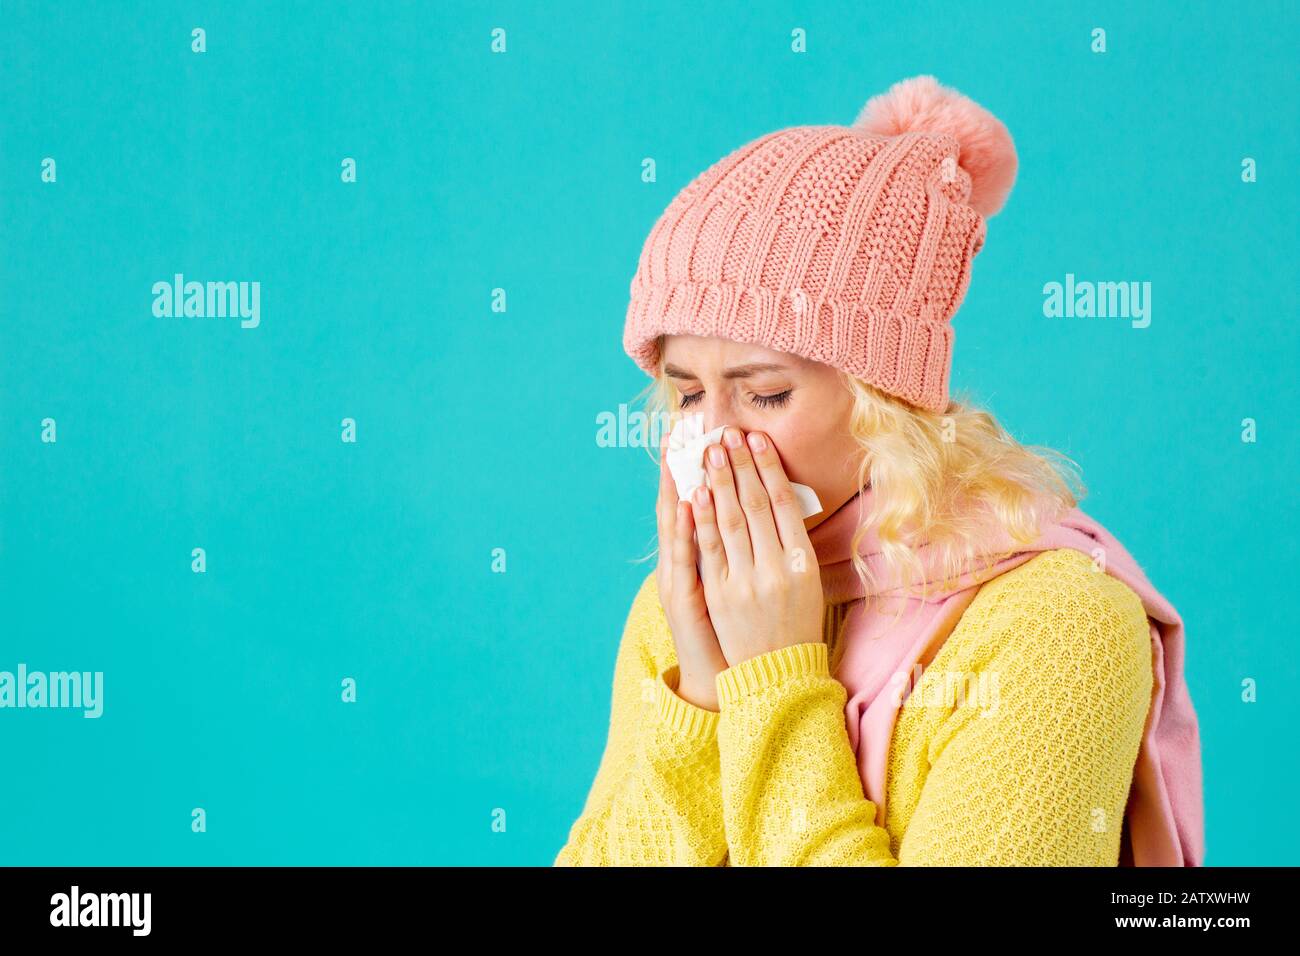 Cold and flu season- portrait of a woman in hat and scarf blowing her nose Stock Photo